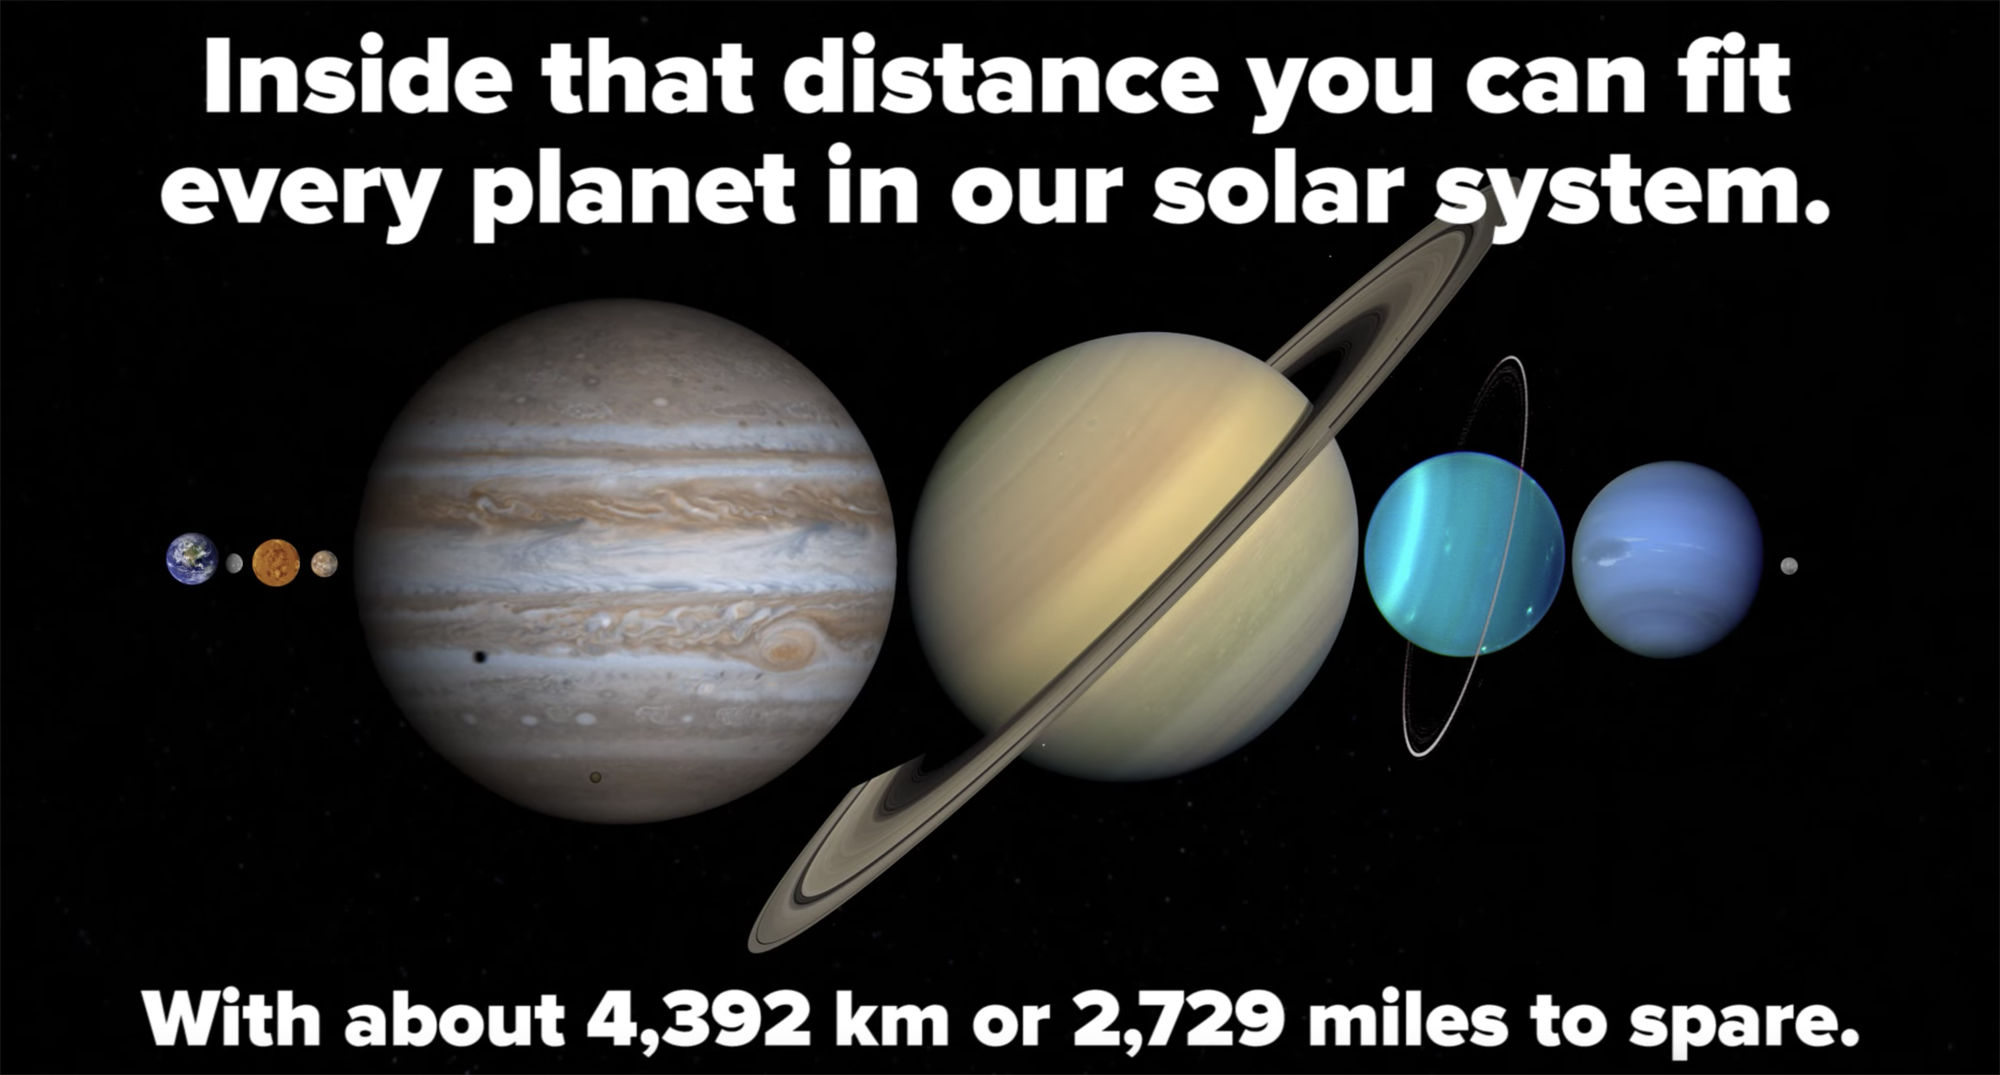 The planets lined up could fit between the Earth and Moon? Fact check: true. Credit: BuzzFeedBlue, from the video